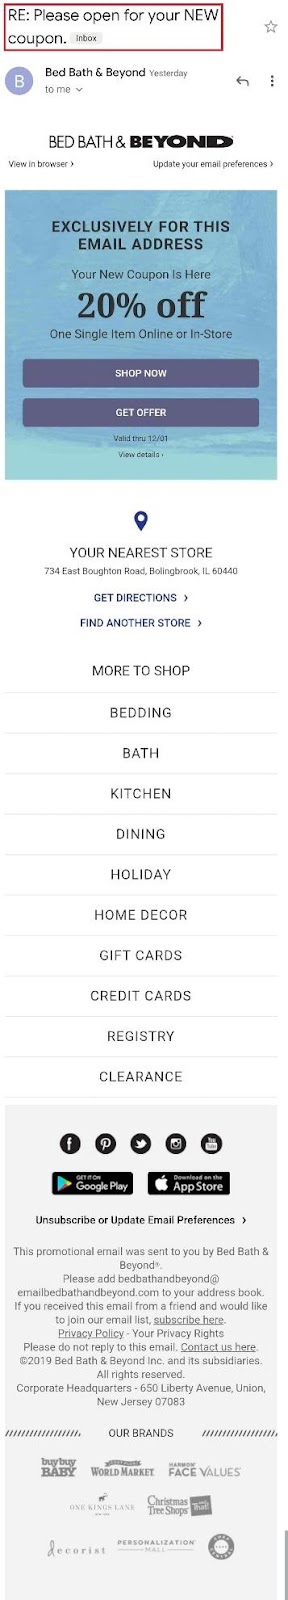 bed bath and beyond email example